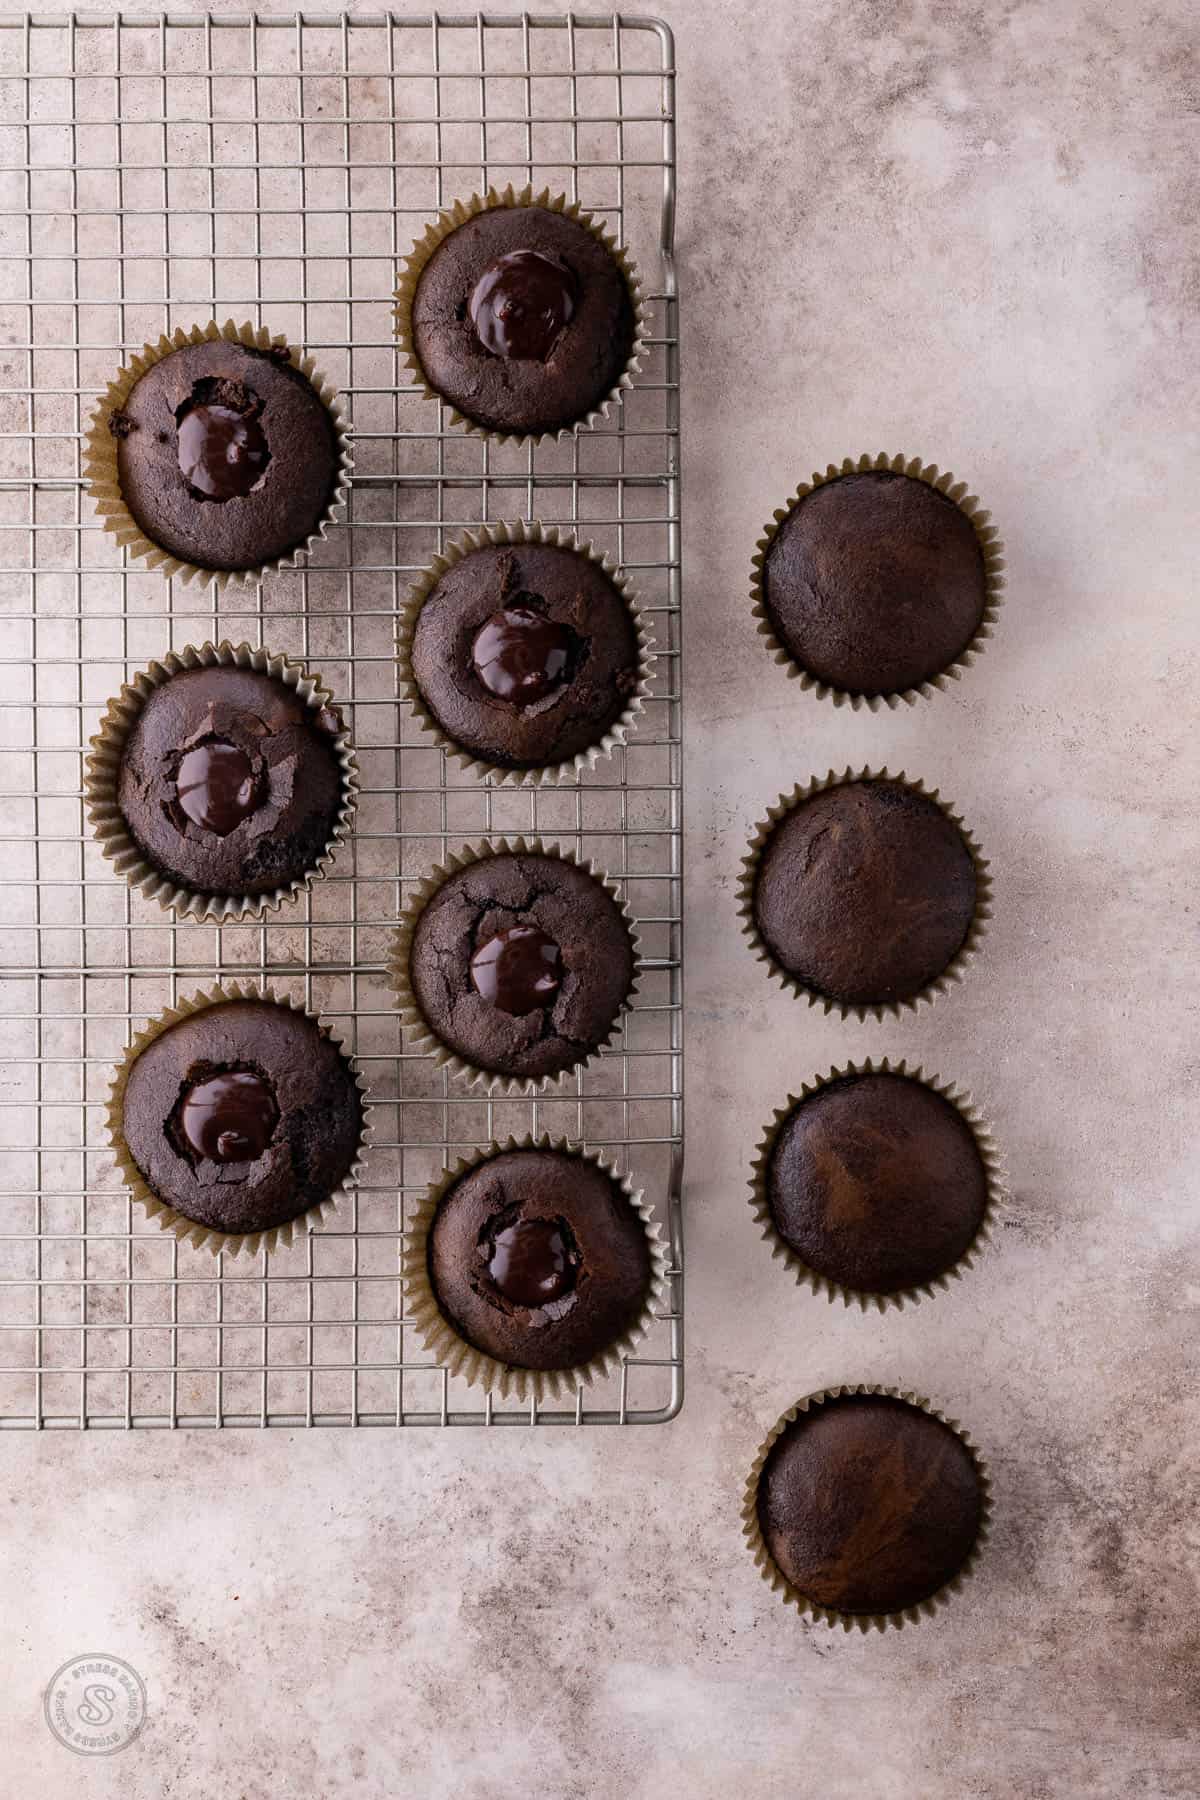 Chocolate cupcakes on a wire rack, with some cored and filled with chocolate ganache